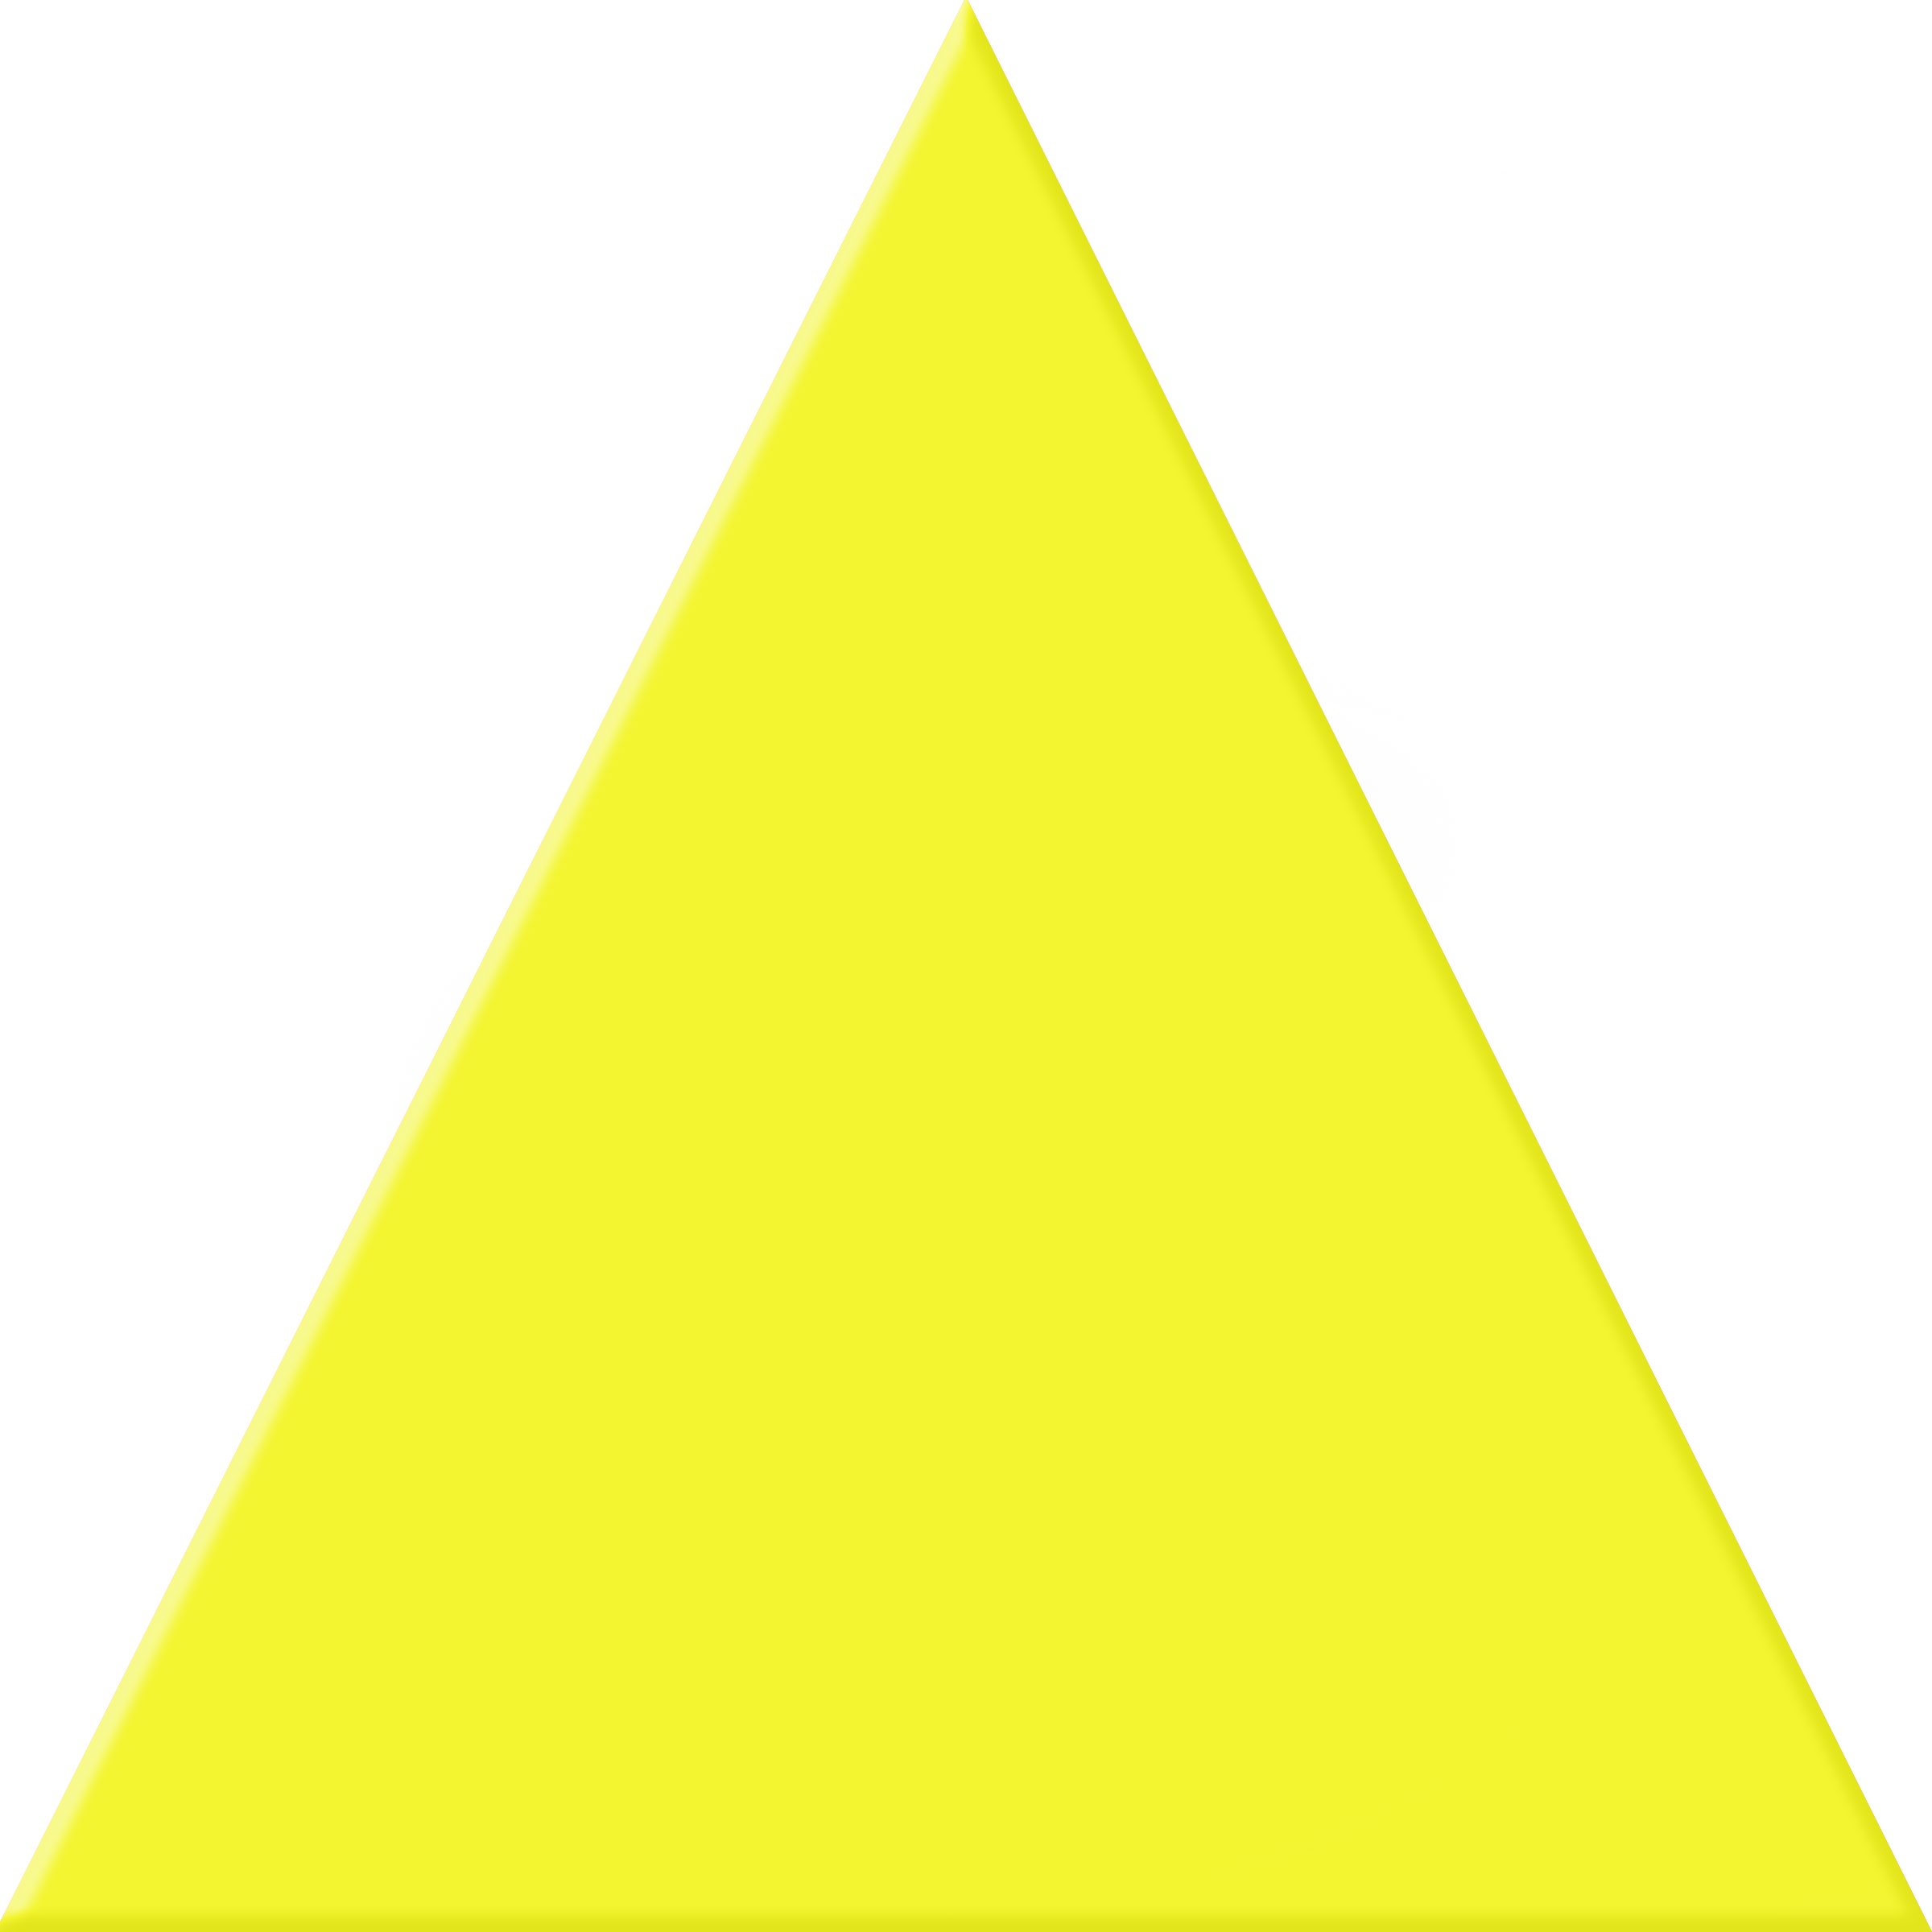 triangle clipart yellow